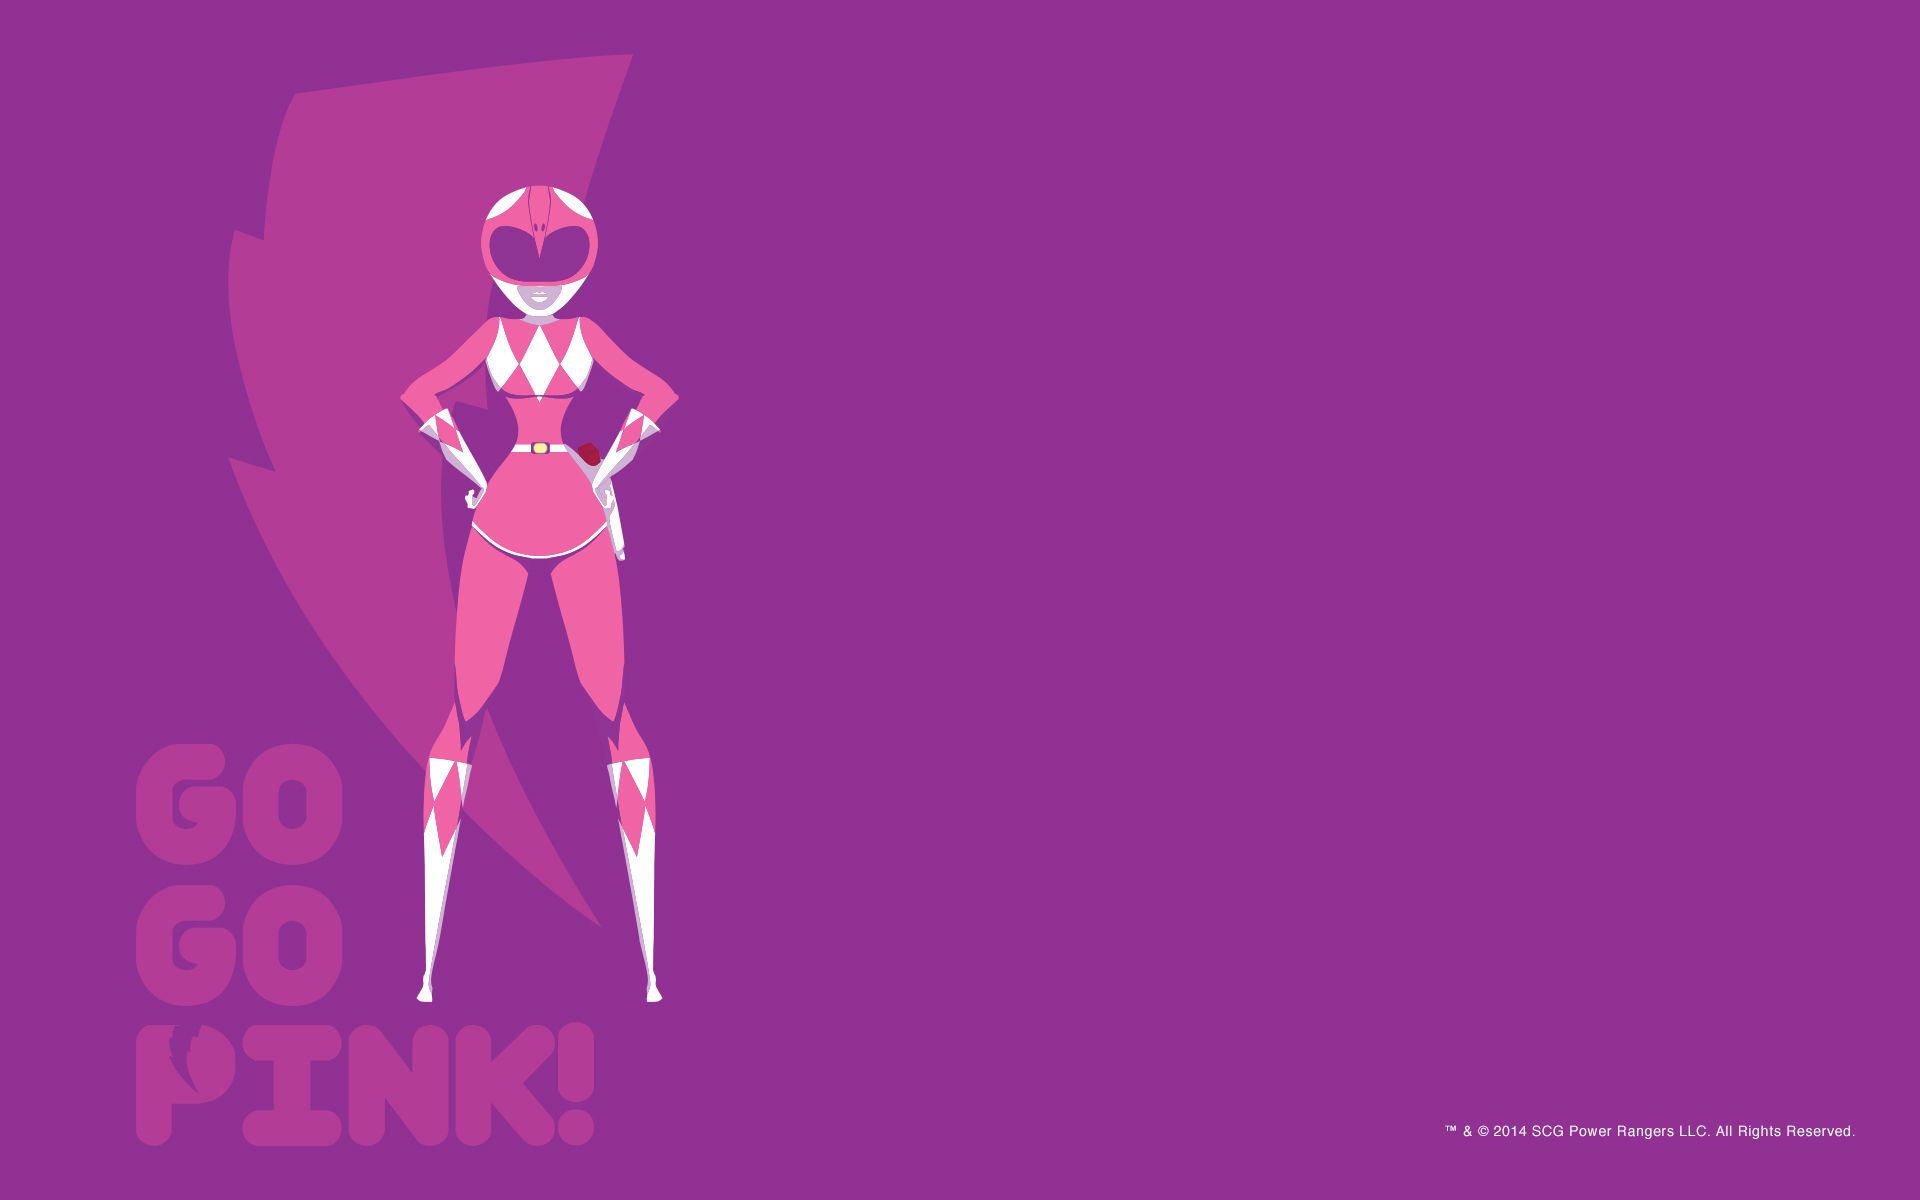 Free download Go Go Pink Wallpaper Power Rangers The Official